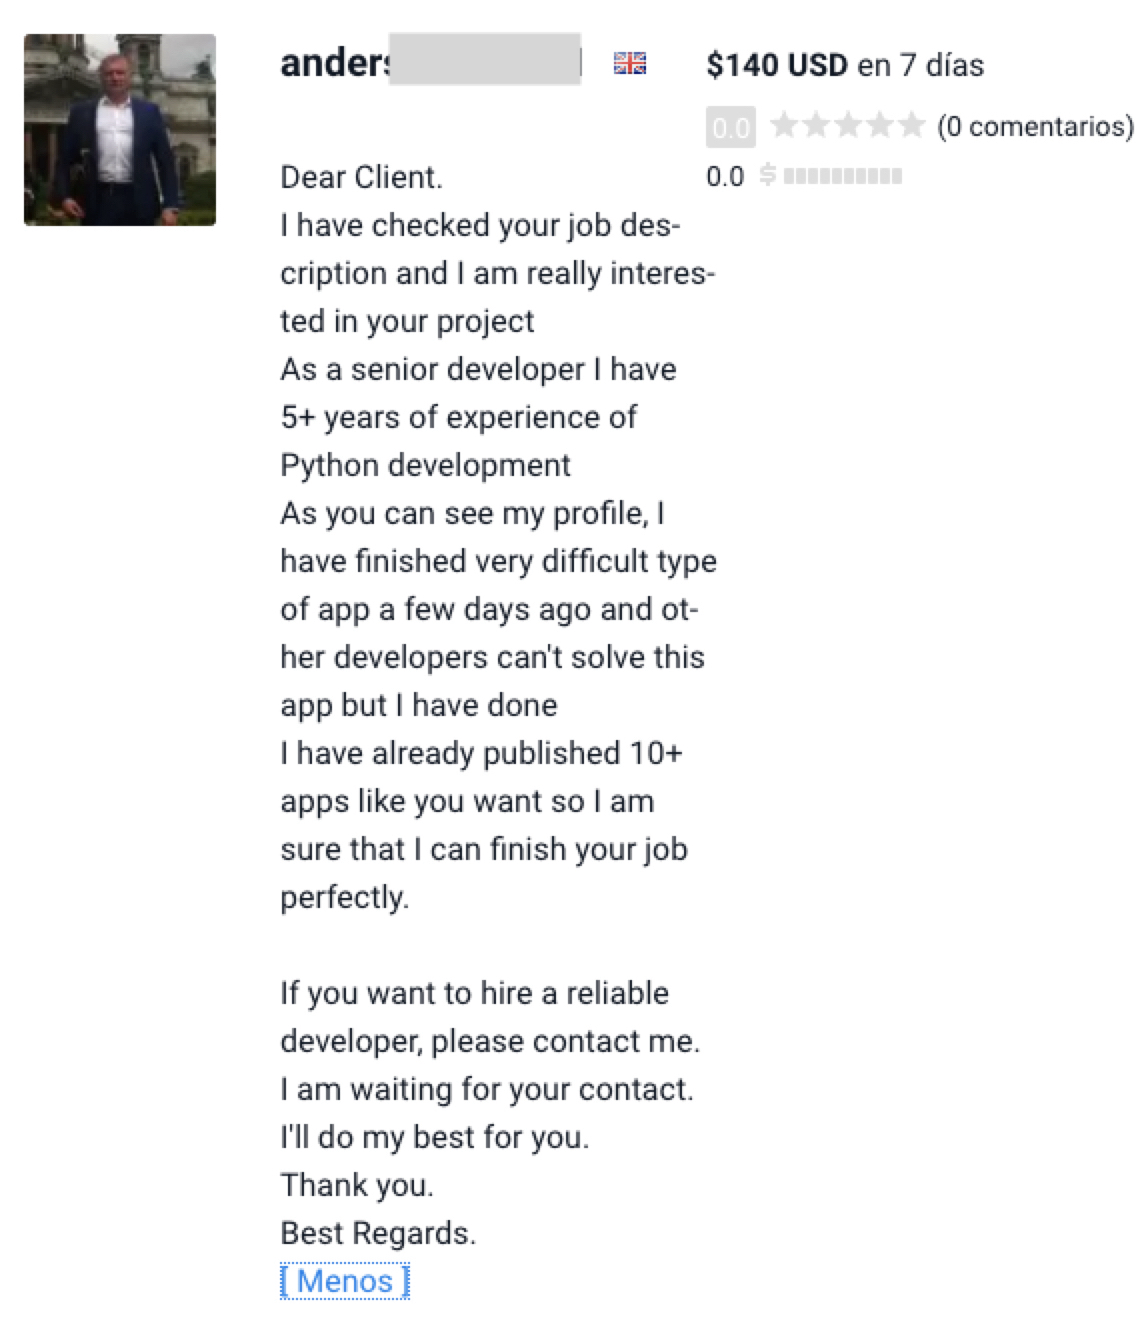 Image 12 is s screenshot of a worker message. Some information has been redacted. Dear client. I have checked your job description and I am really interested in your project. As a senior developer, I have 5+ years of experience of python development. As you can see my profile, I have finished very difficult type of app a few days ago and other developers can't solve this app but I have done. I have already published 10+ apps like you want to so I am sure that I can finish your job perfectly. If you want to hire a reliable developer, please contact me. I am waiting for your contact. I'll do my best for you. Thank you. Best regards. Some of the other language in the screenshot is in Spanish.